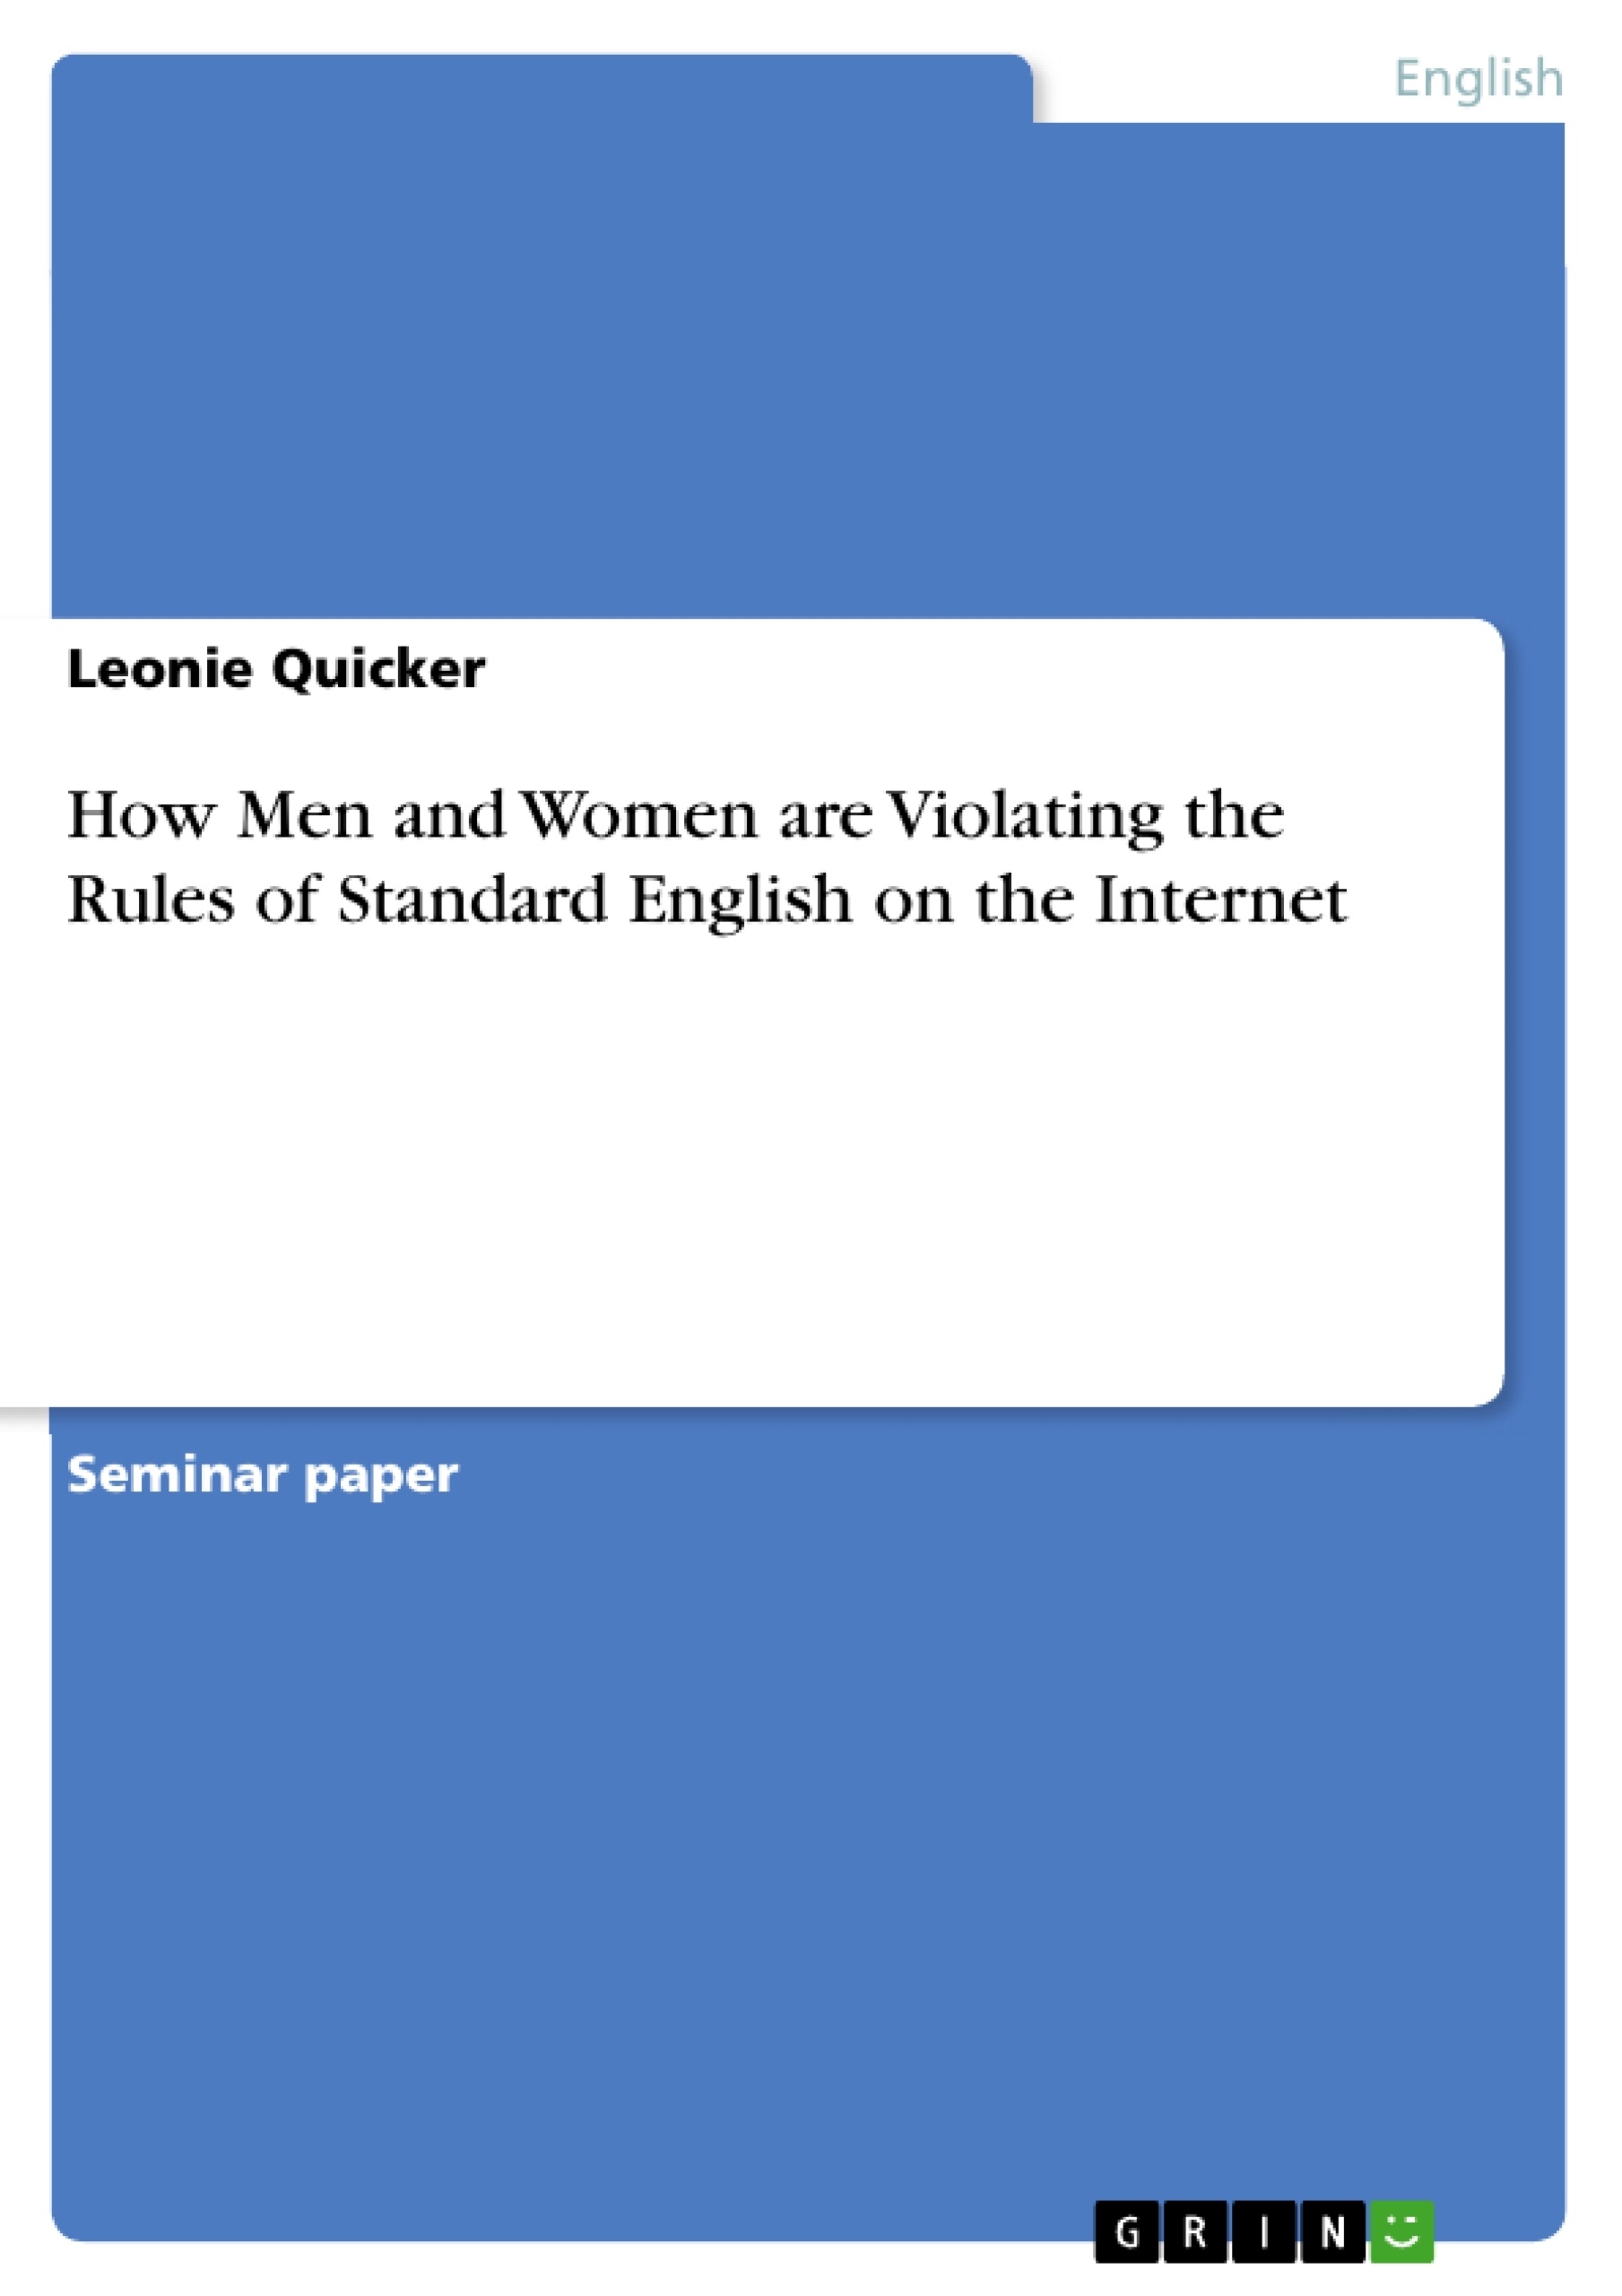 Title: How Men and Women are Violating the Rules of Standard English on the Internet